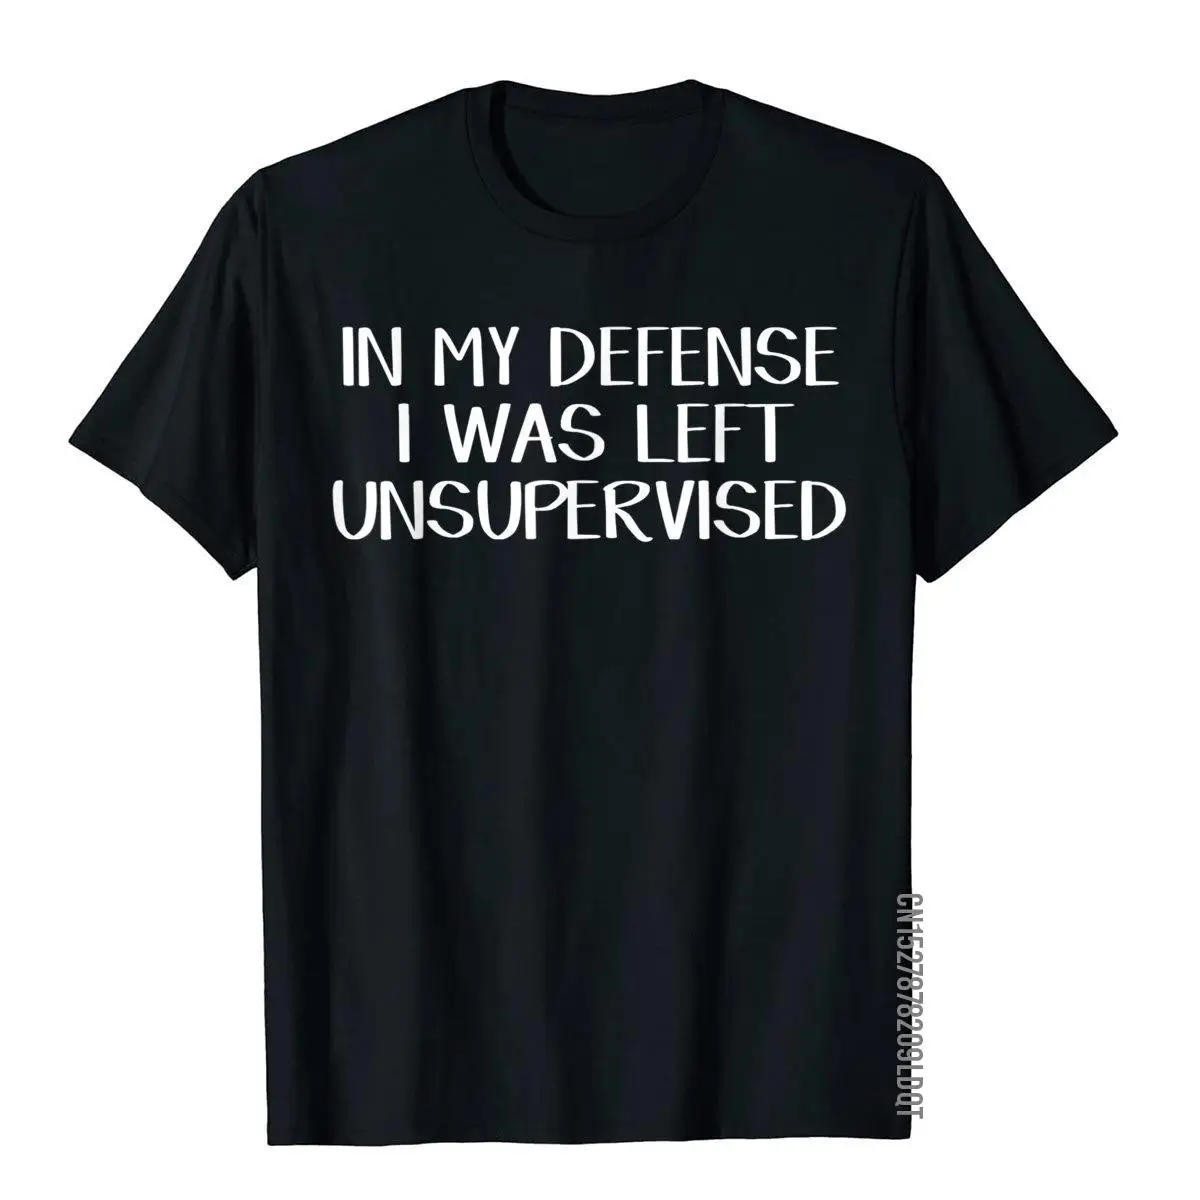 In my defense I was left unsupervised T-Shirt__B5603black